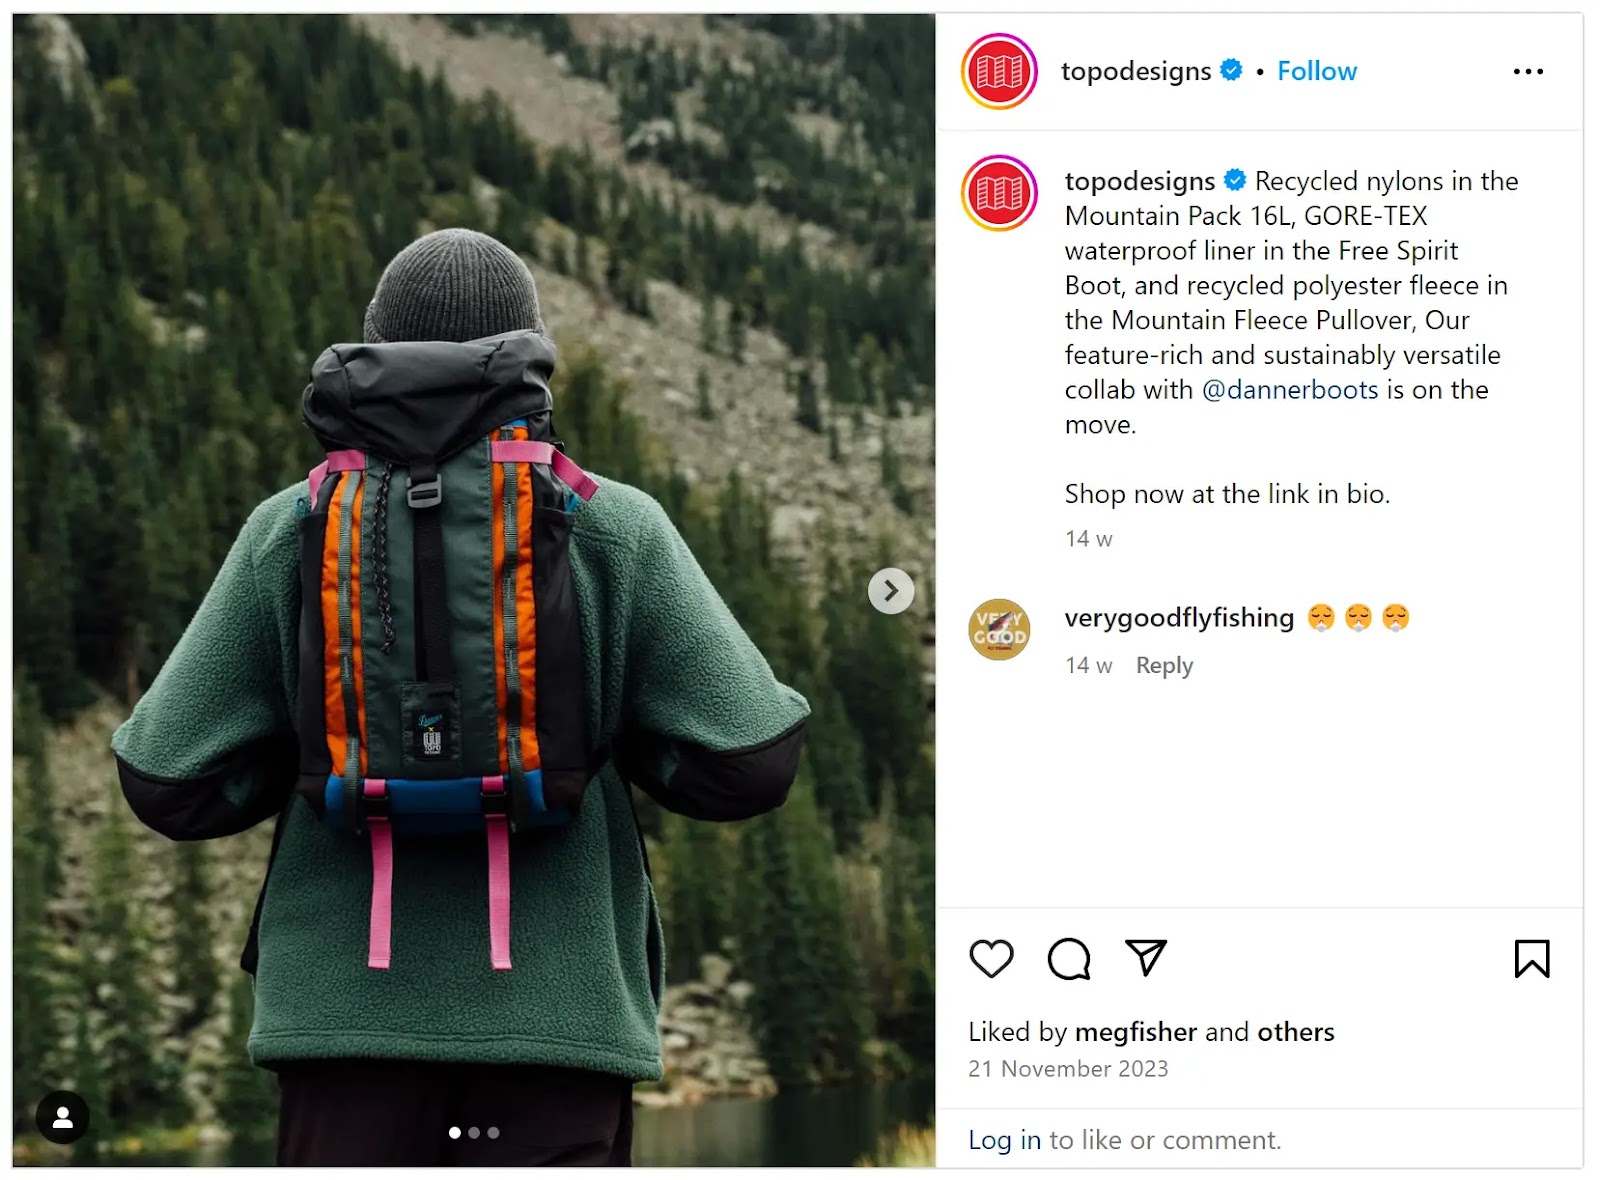 Instagram station  from outdoor apparel institution  Topo Designs, promoting their products